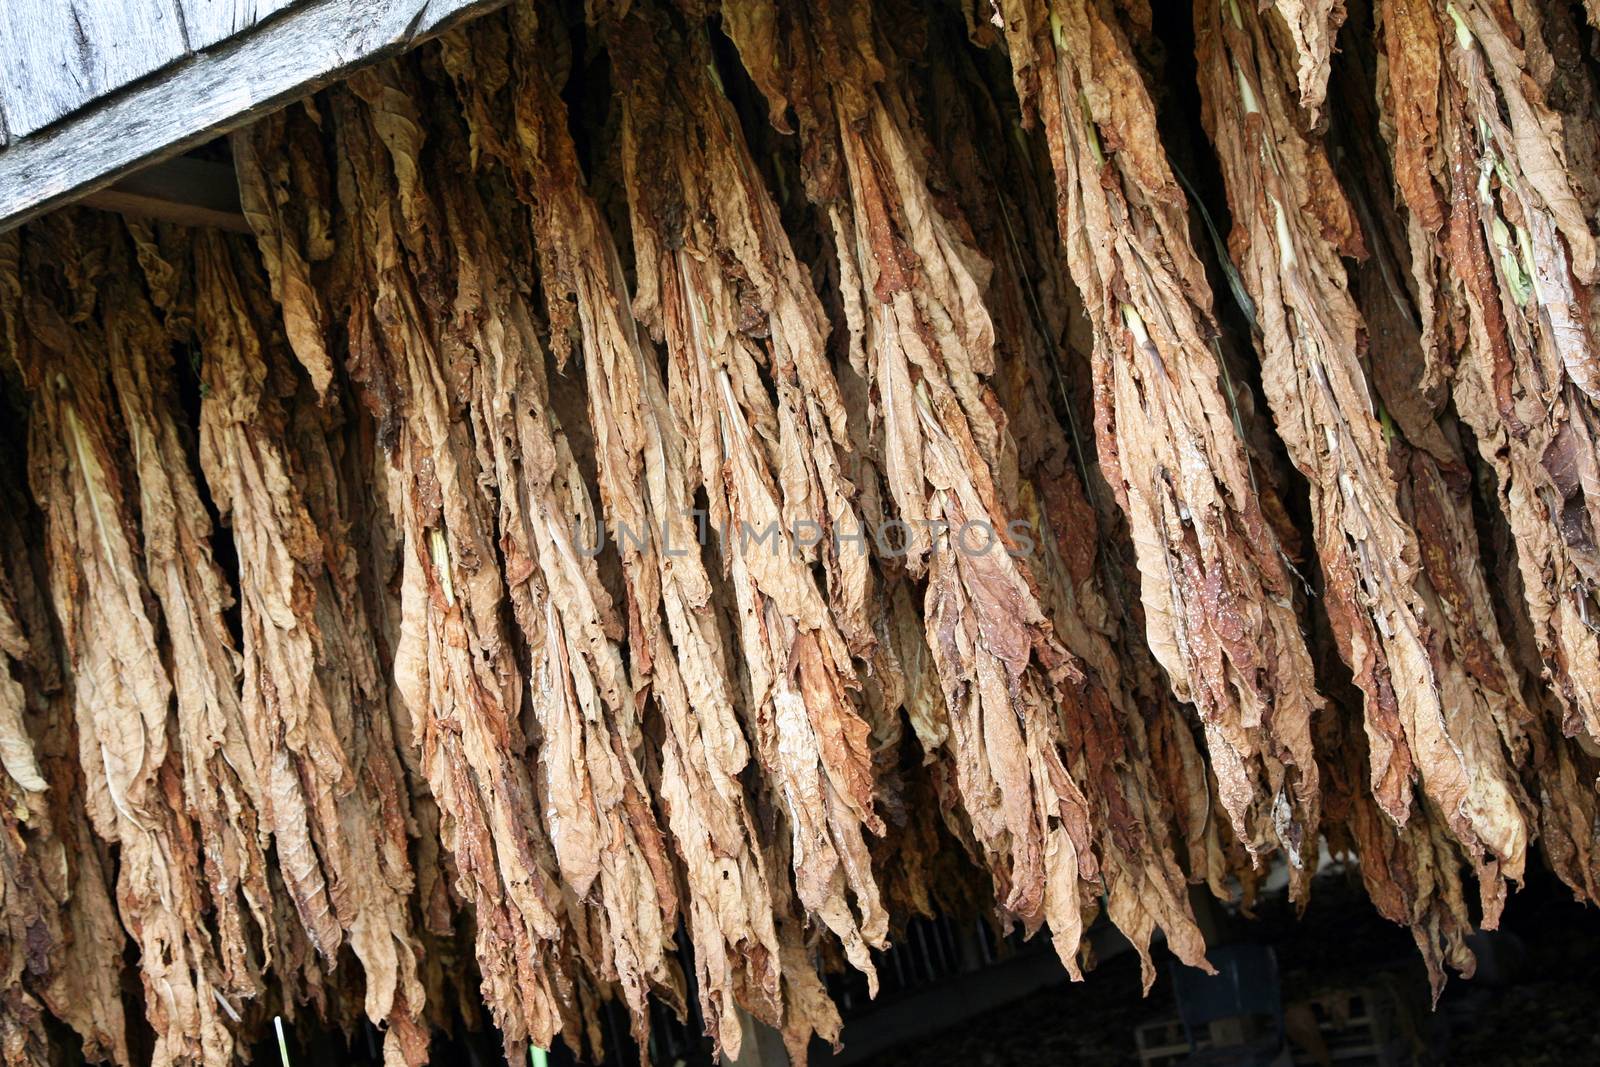 Tobacco ages in the barn before further processing.